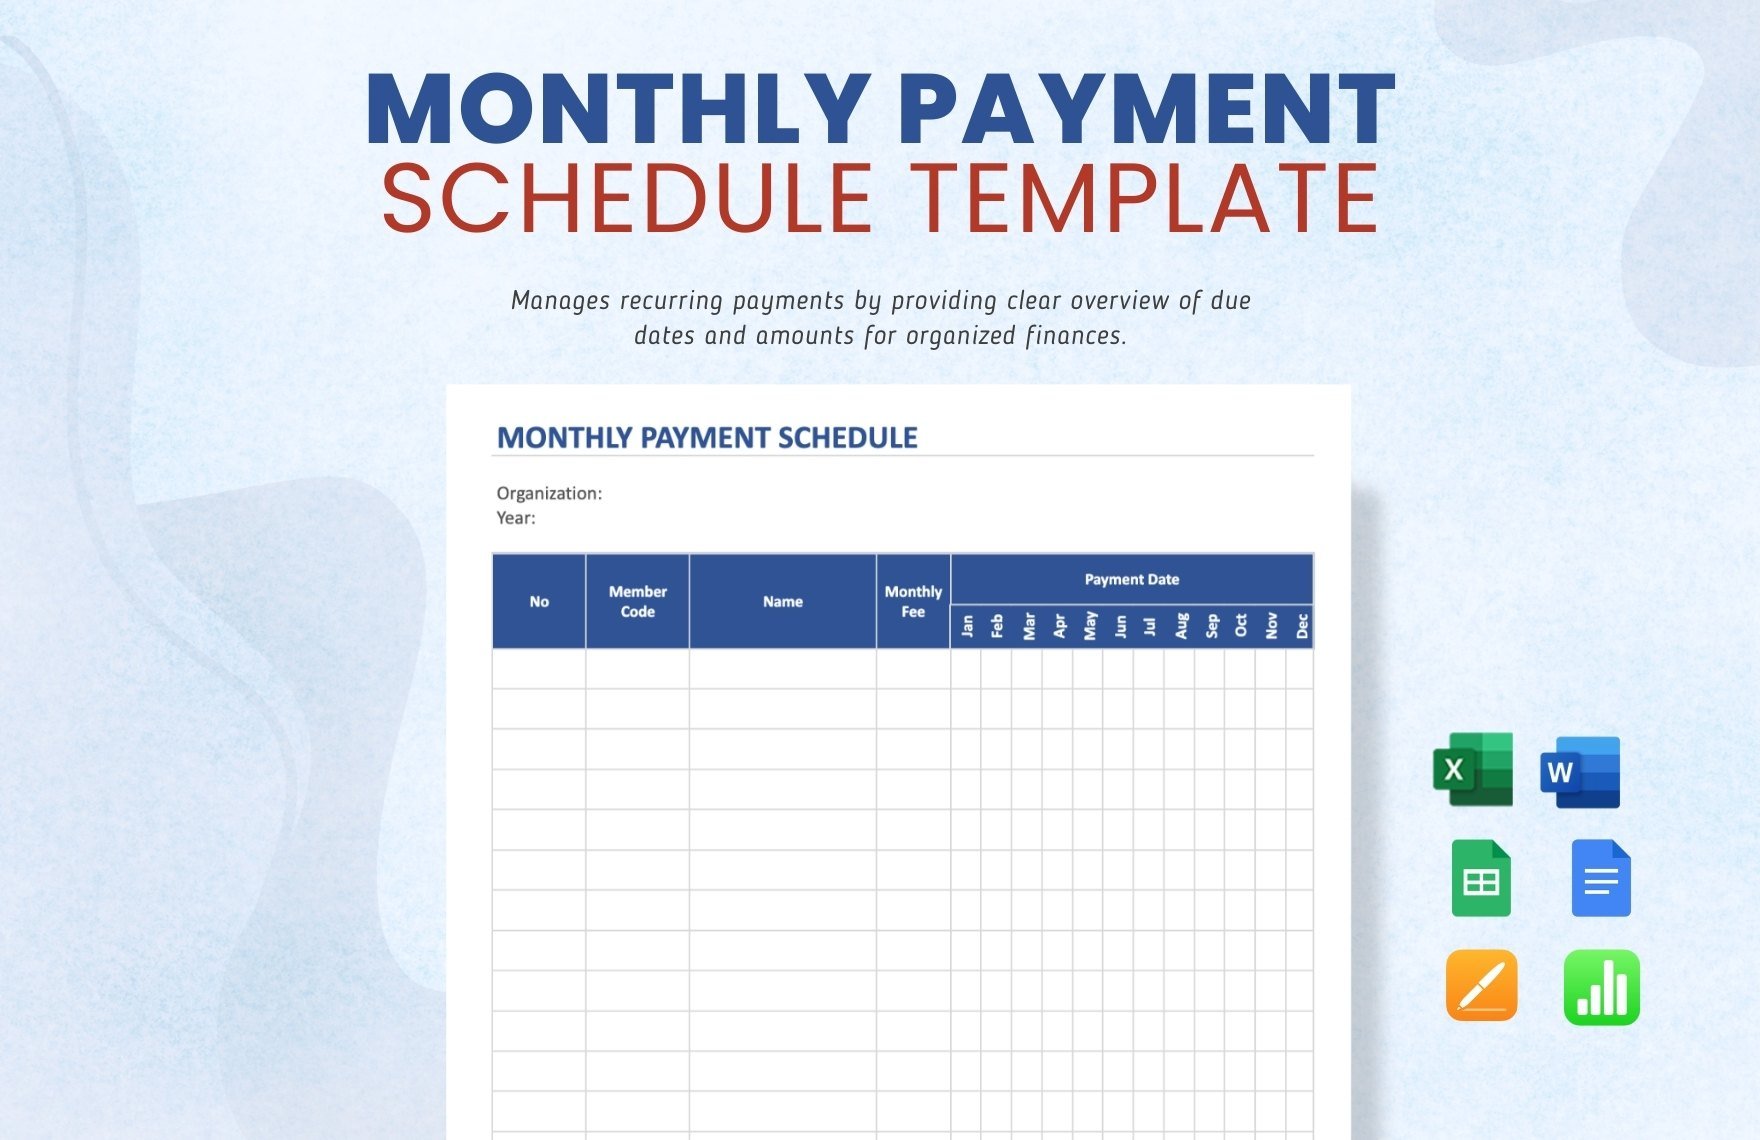 Monthly Payment Schedule Template